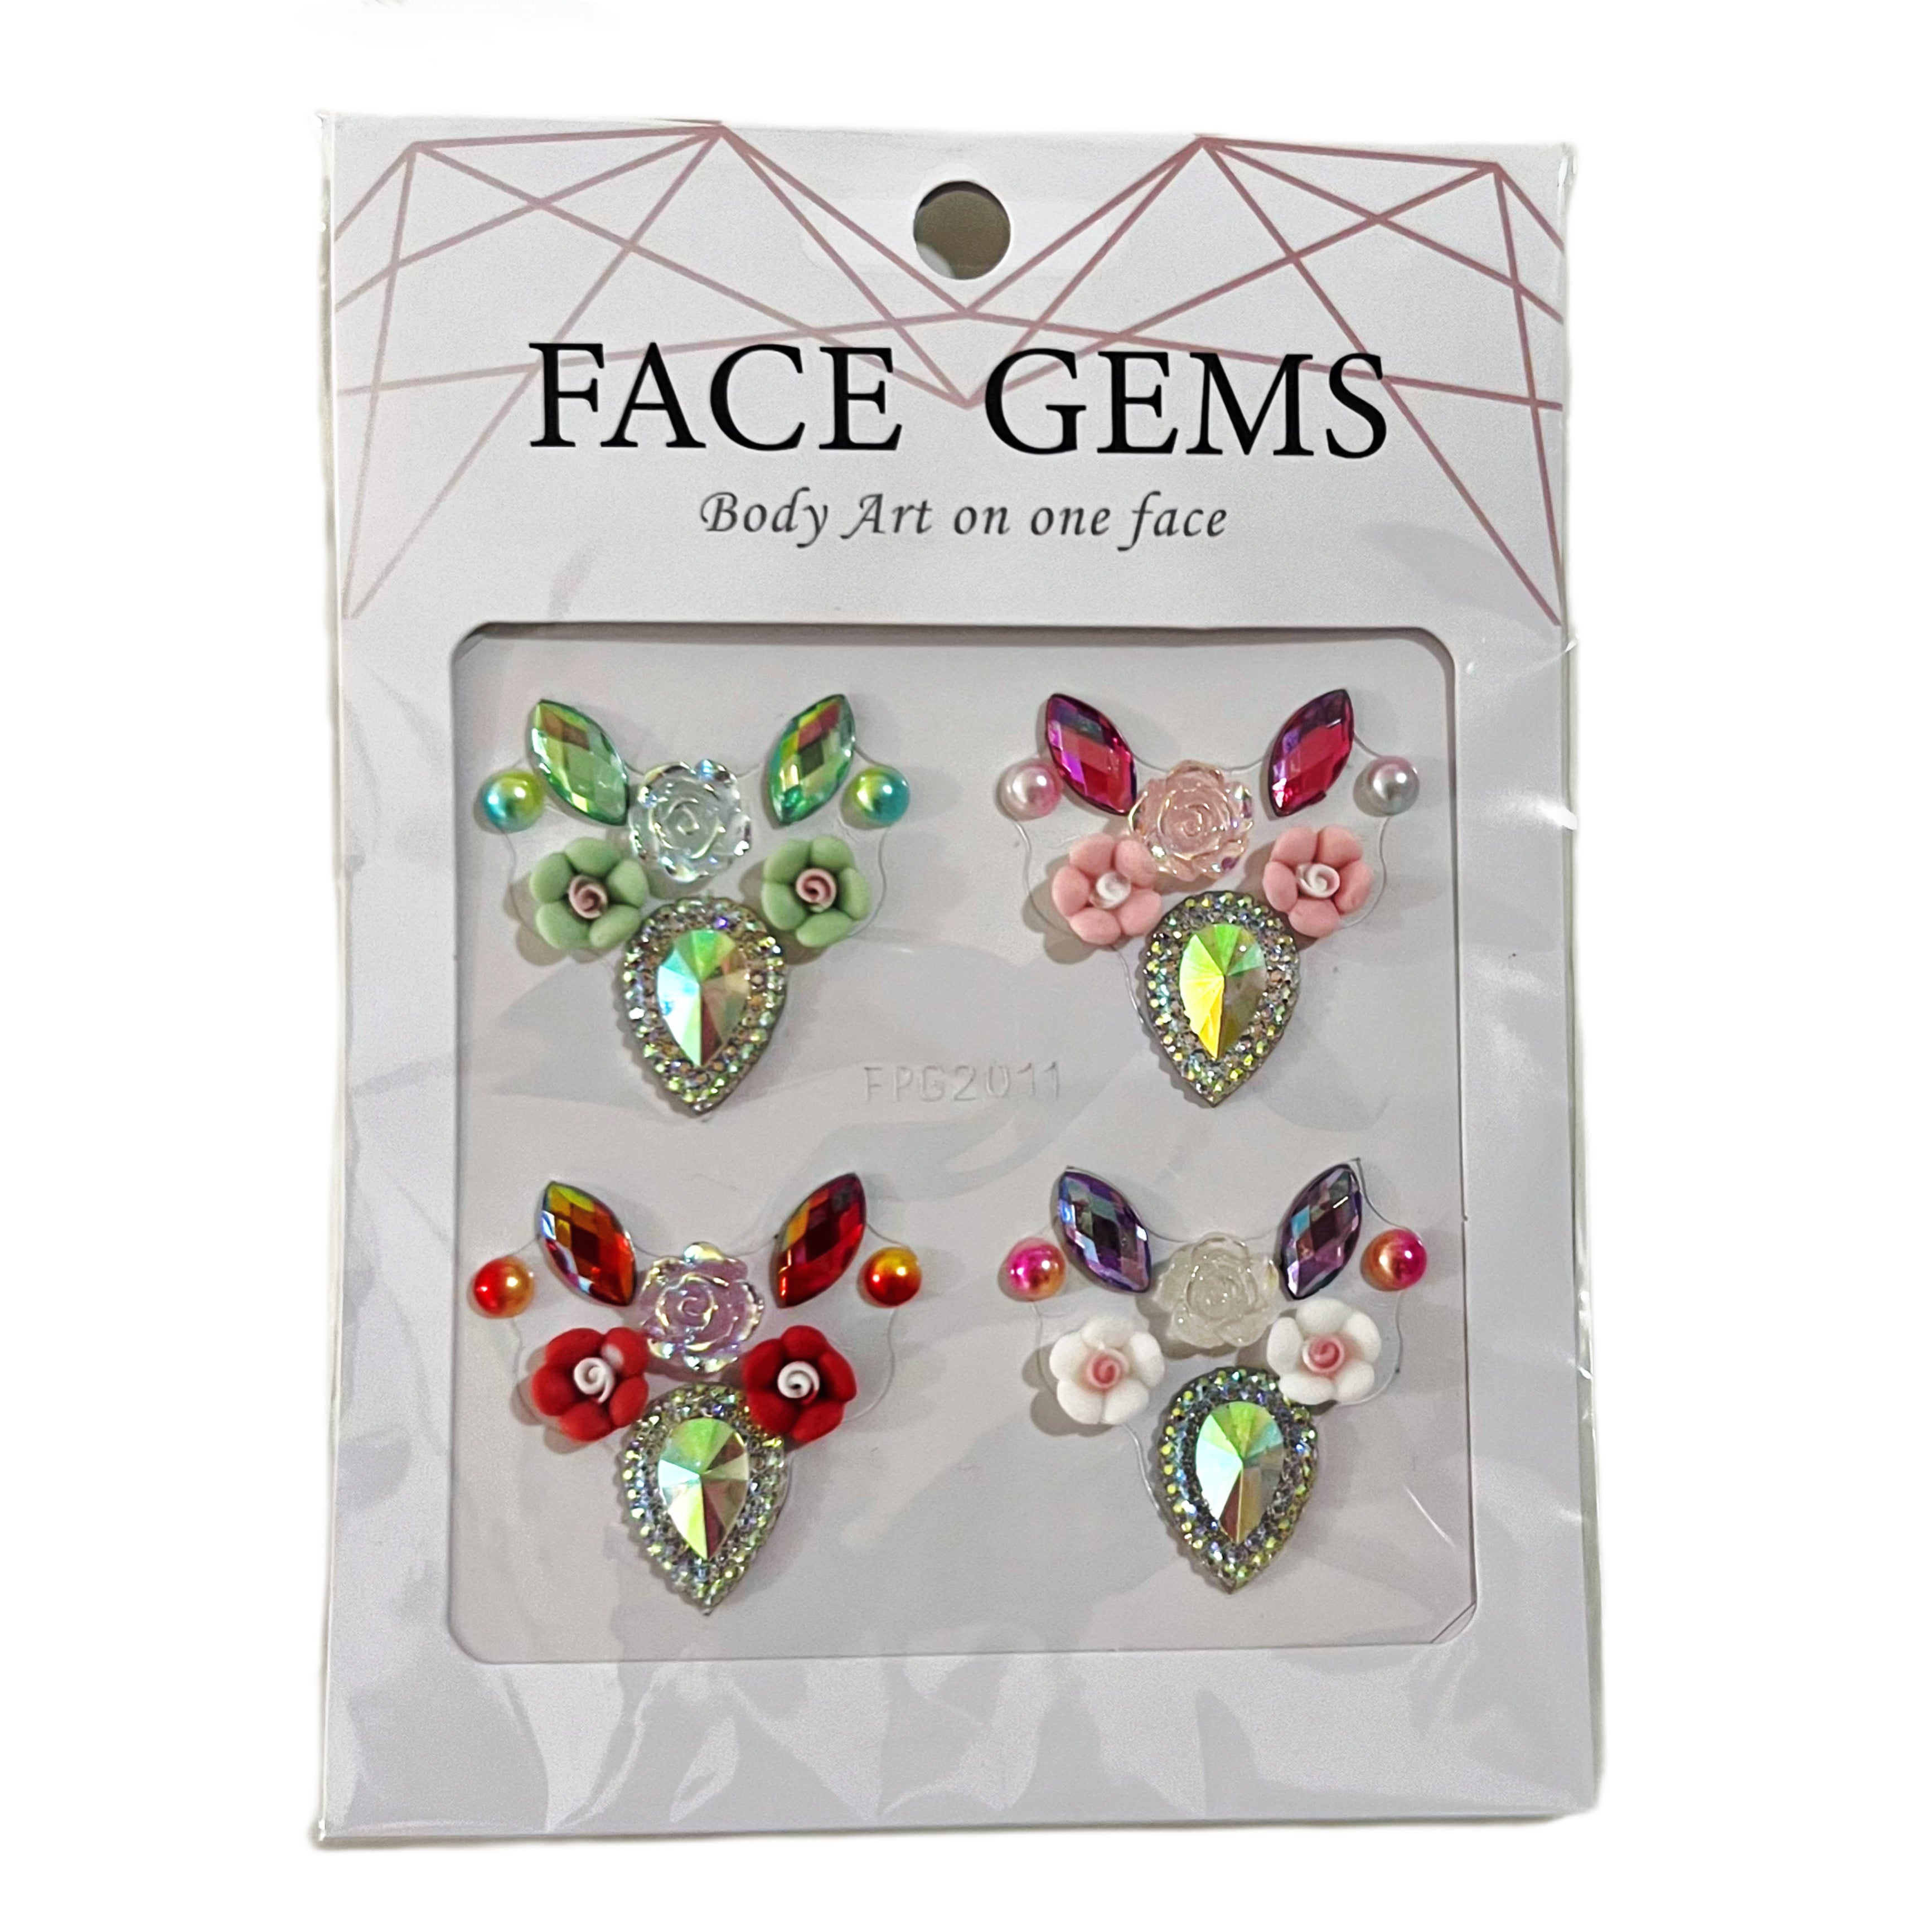 Adhesive Face Jewels  Face jewels, Jewels, Dazzling earrings